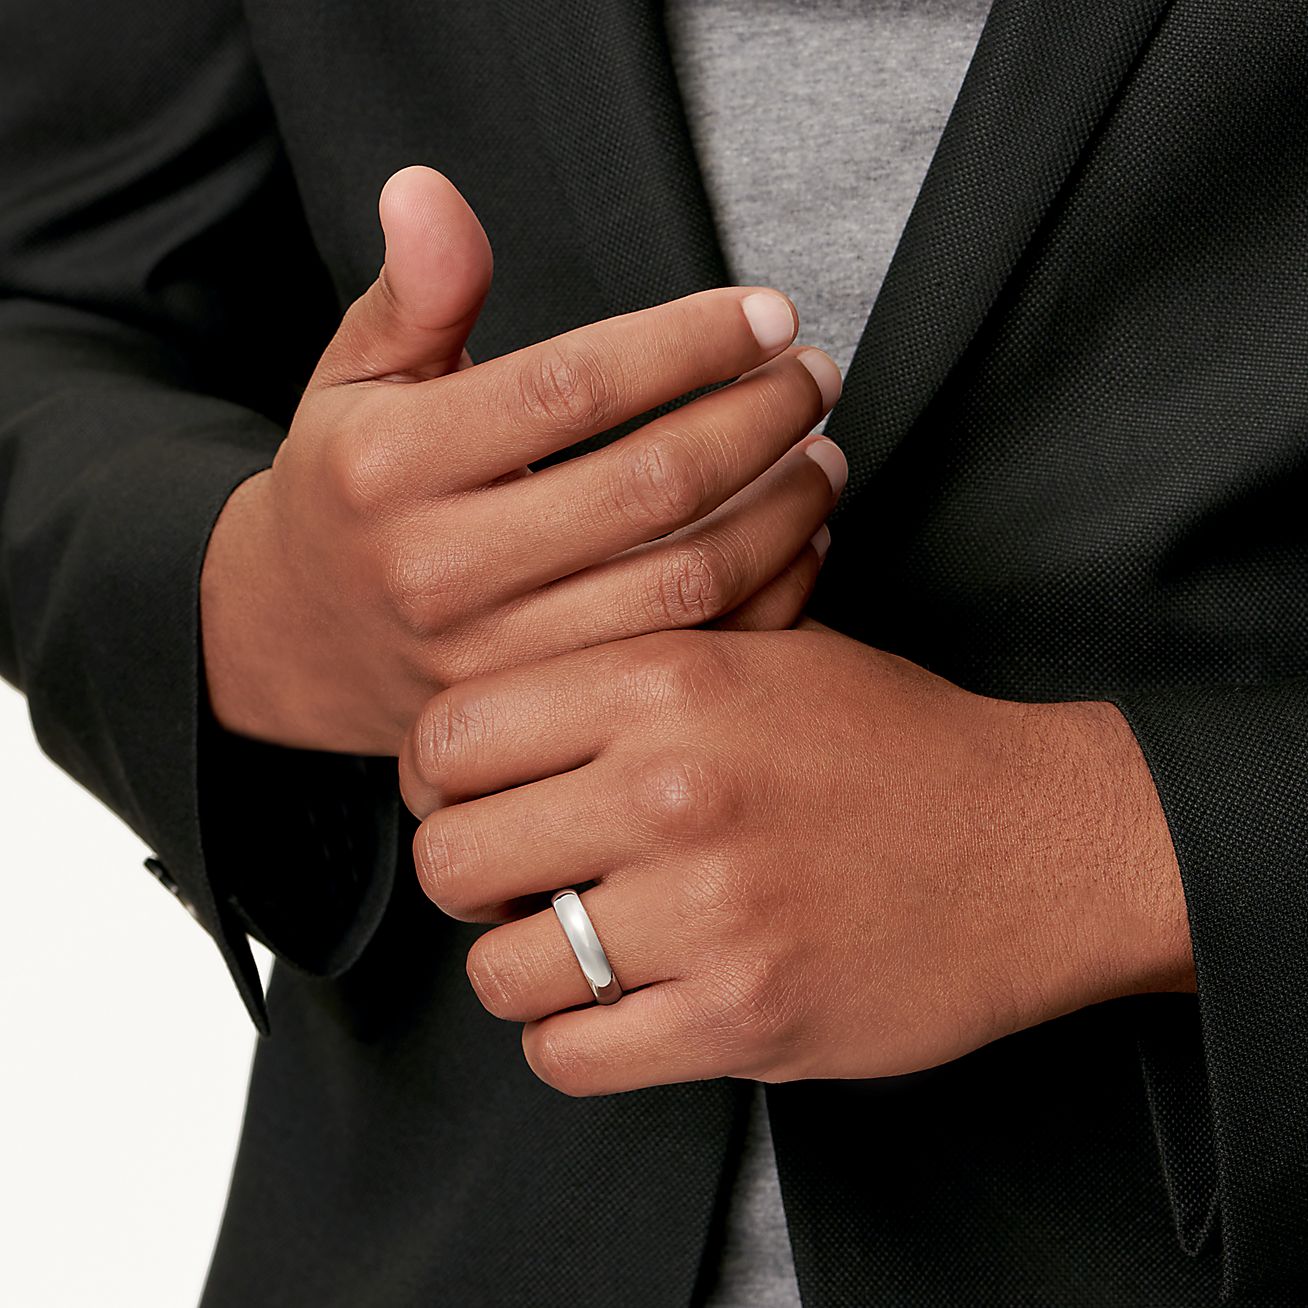 Ring Avulsion Injuries and Injury from Wedding Band